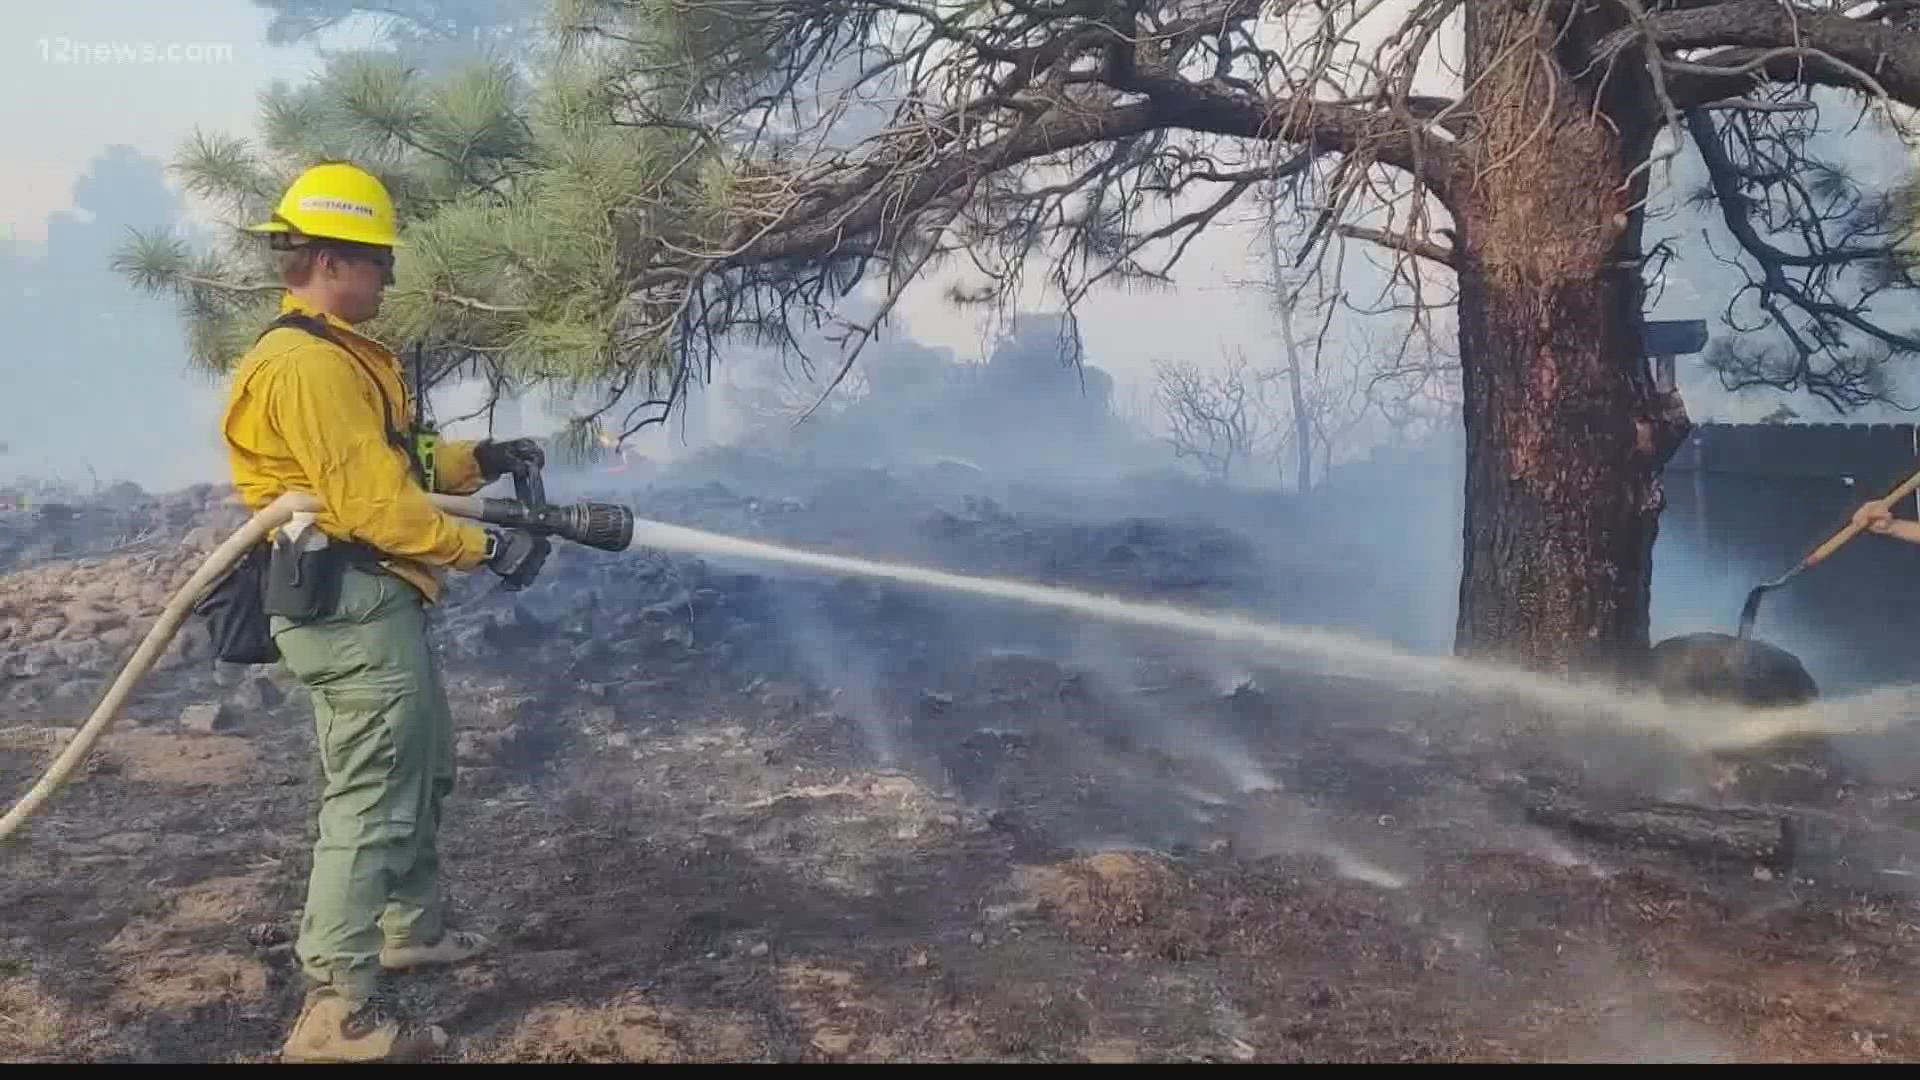 Fire season in Arizona is getting longer, summers are getting hotter and drier. All of these things have an impact on how fires are fought.